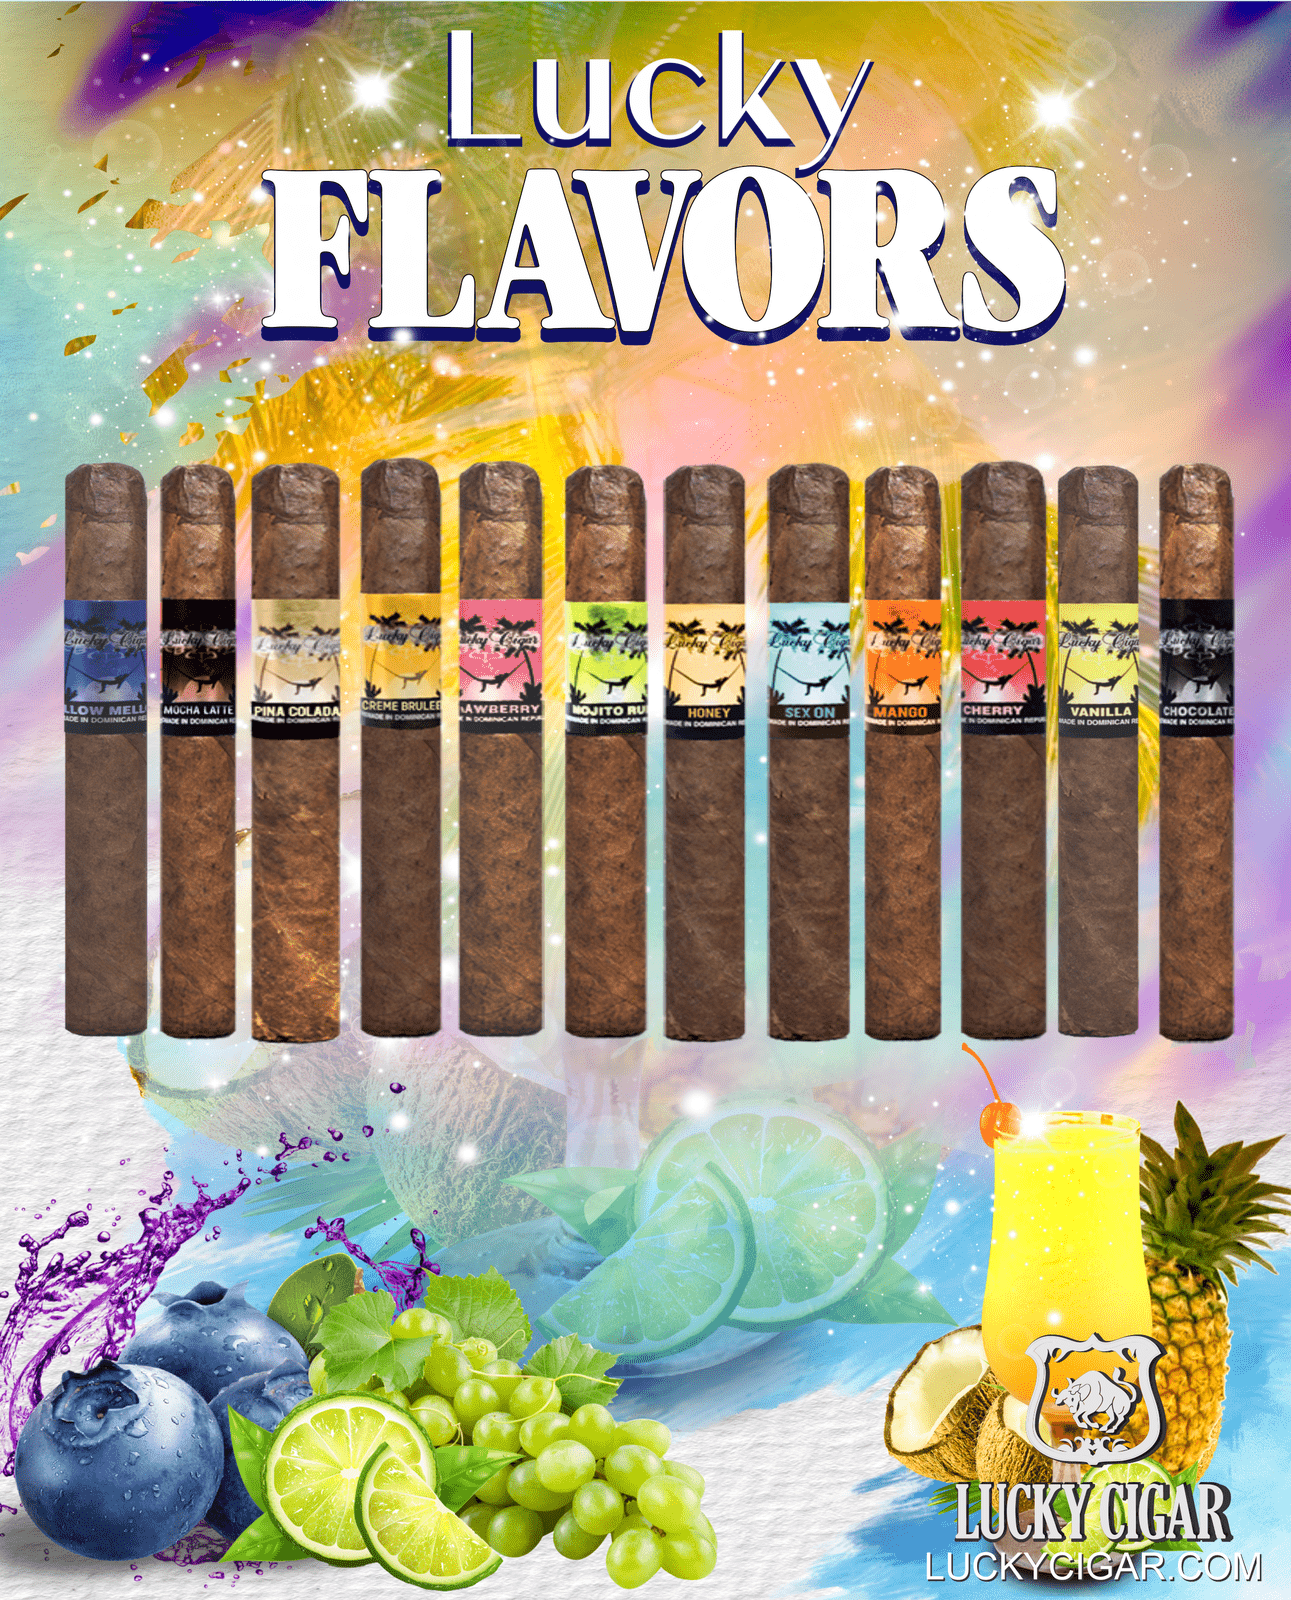 Flavored Cigars: Lucky Flavors Sampler of 12 Cigars